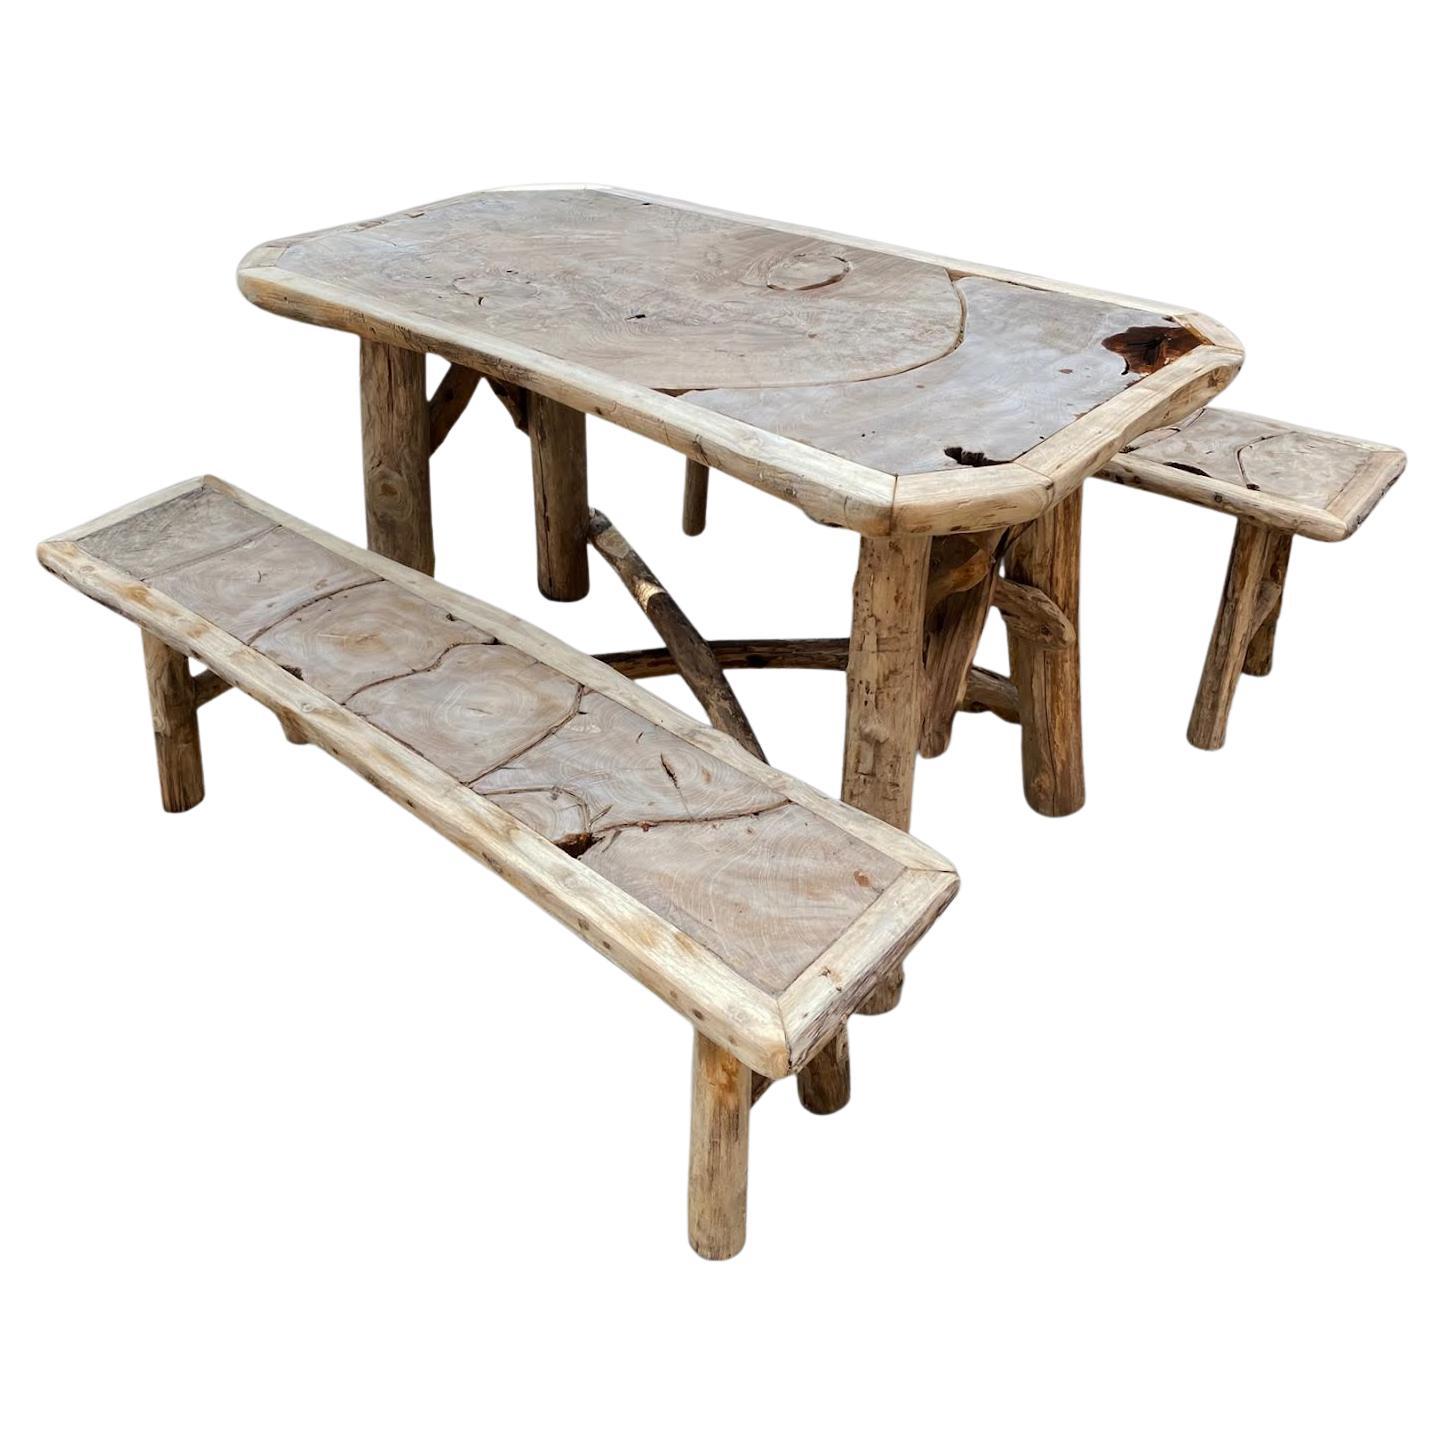 Quirky 20th Century Driftwood and Olive Wood Garden Furniture Set